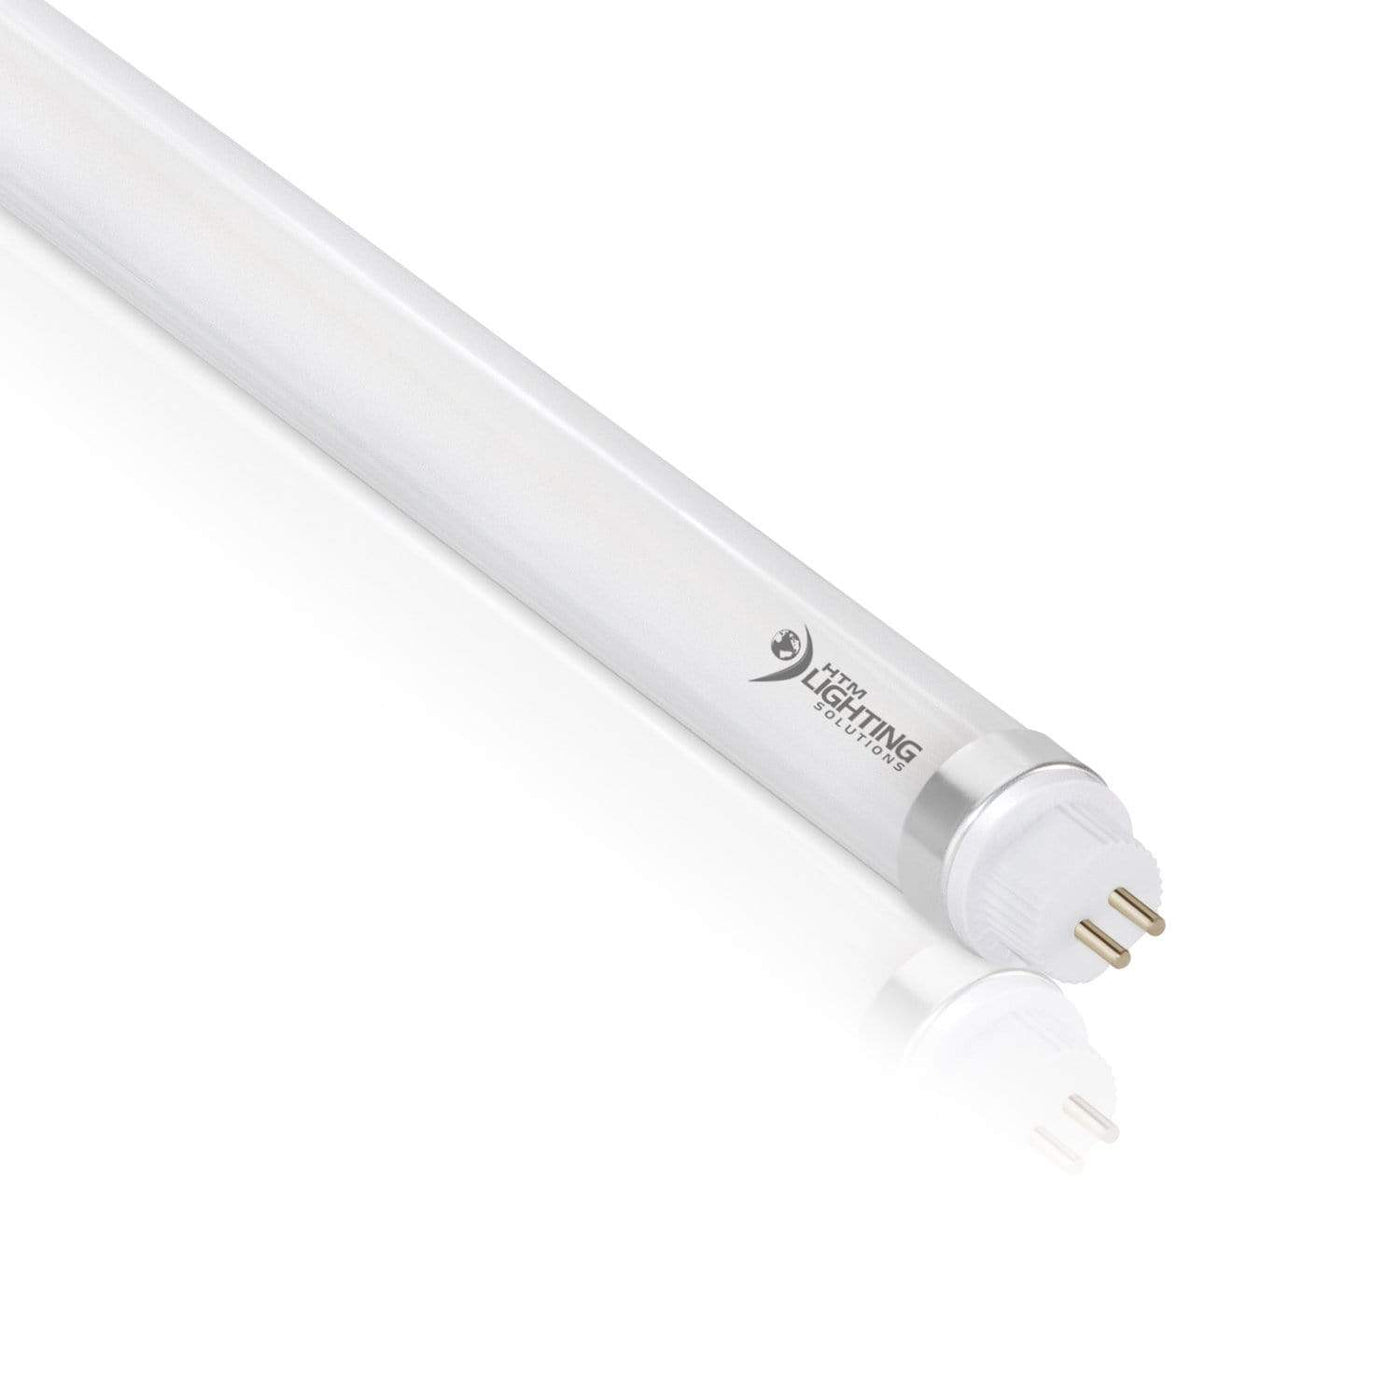 The Hotel powder crater 4ft t5 High Output LED Tube Light - G5 Bipin | HTM Lighting